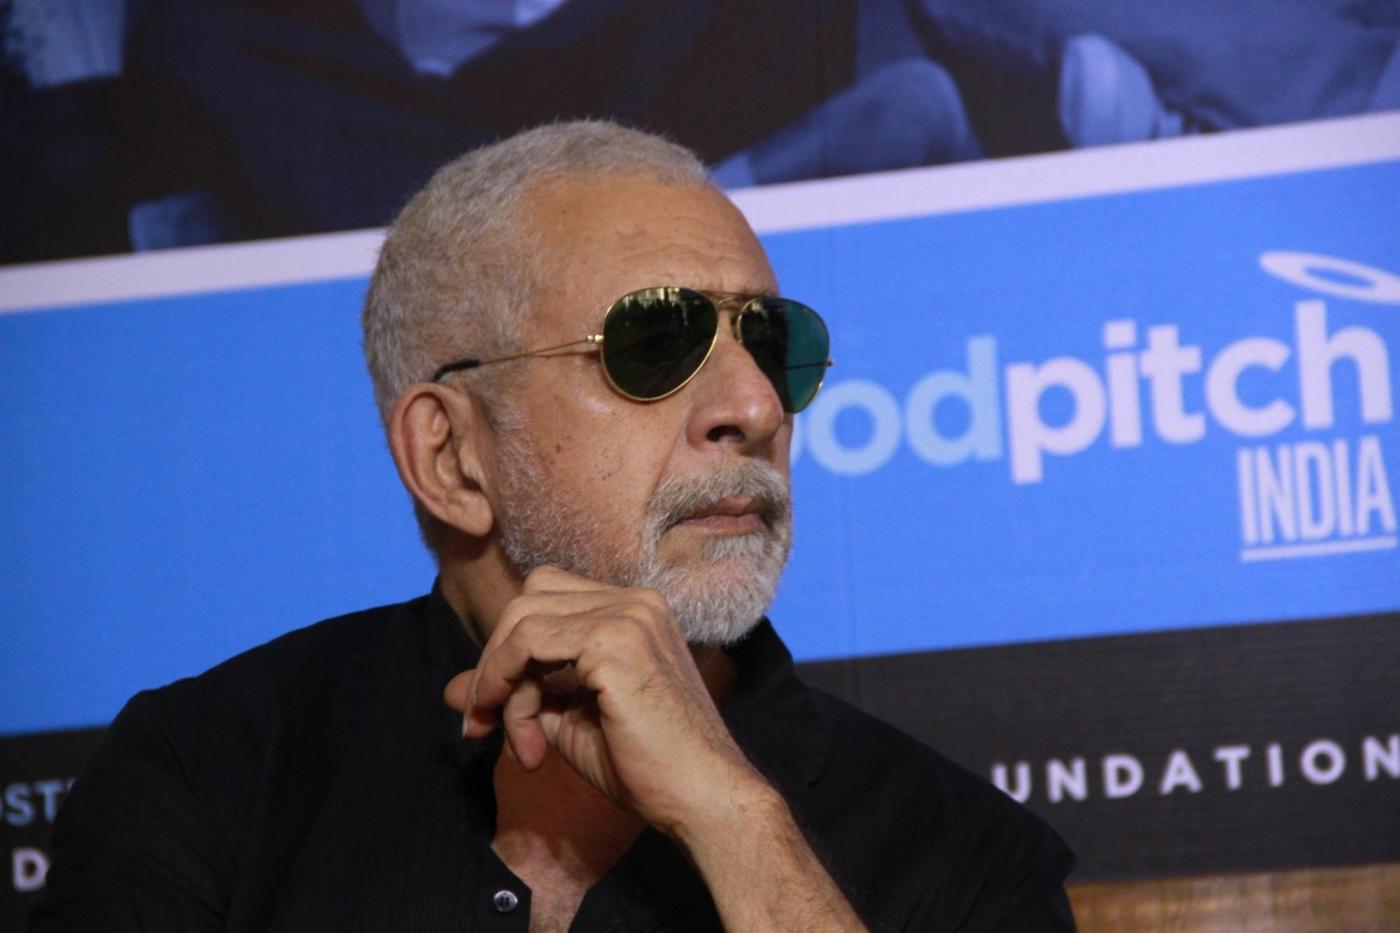 Mumbai: Actor Naseeruddin Shah during a press announcement for 'Films For Change' initiative organised by Good Pitch India in Mumbai on March 14, 2018. (Photo: IANS) by . 